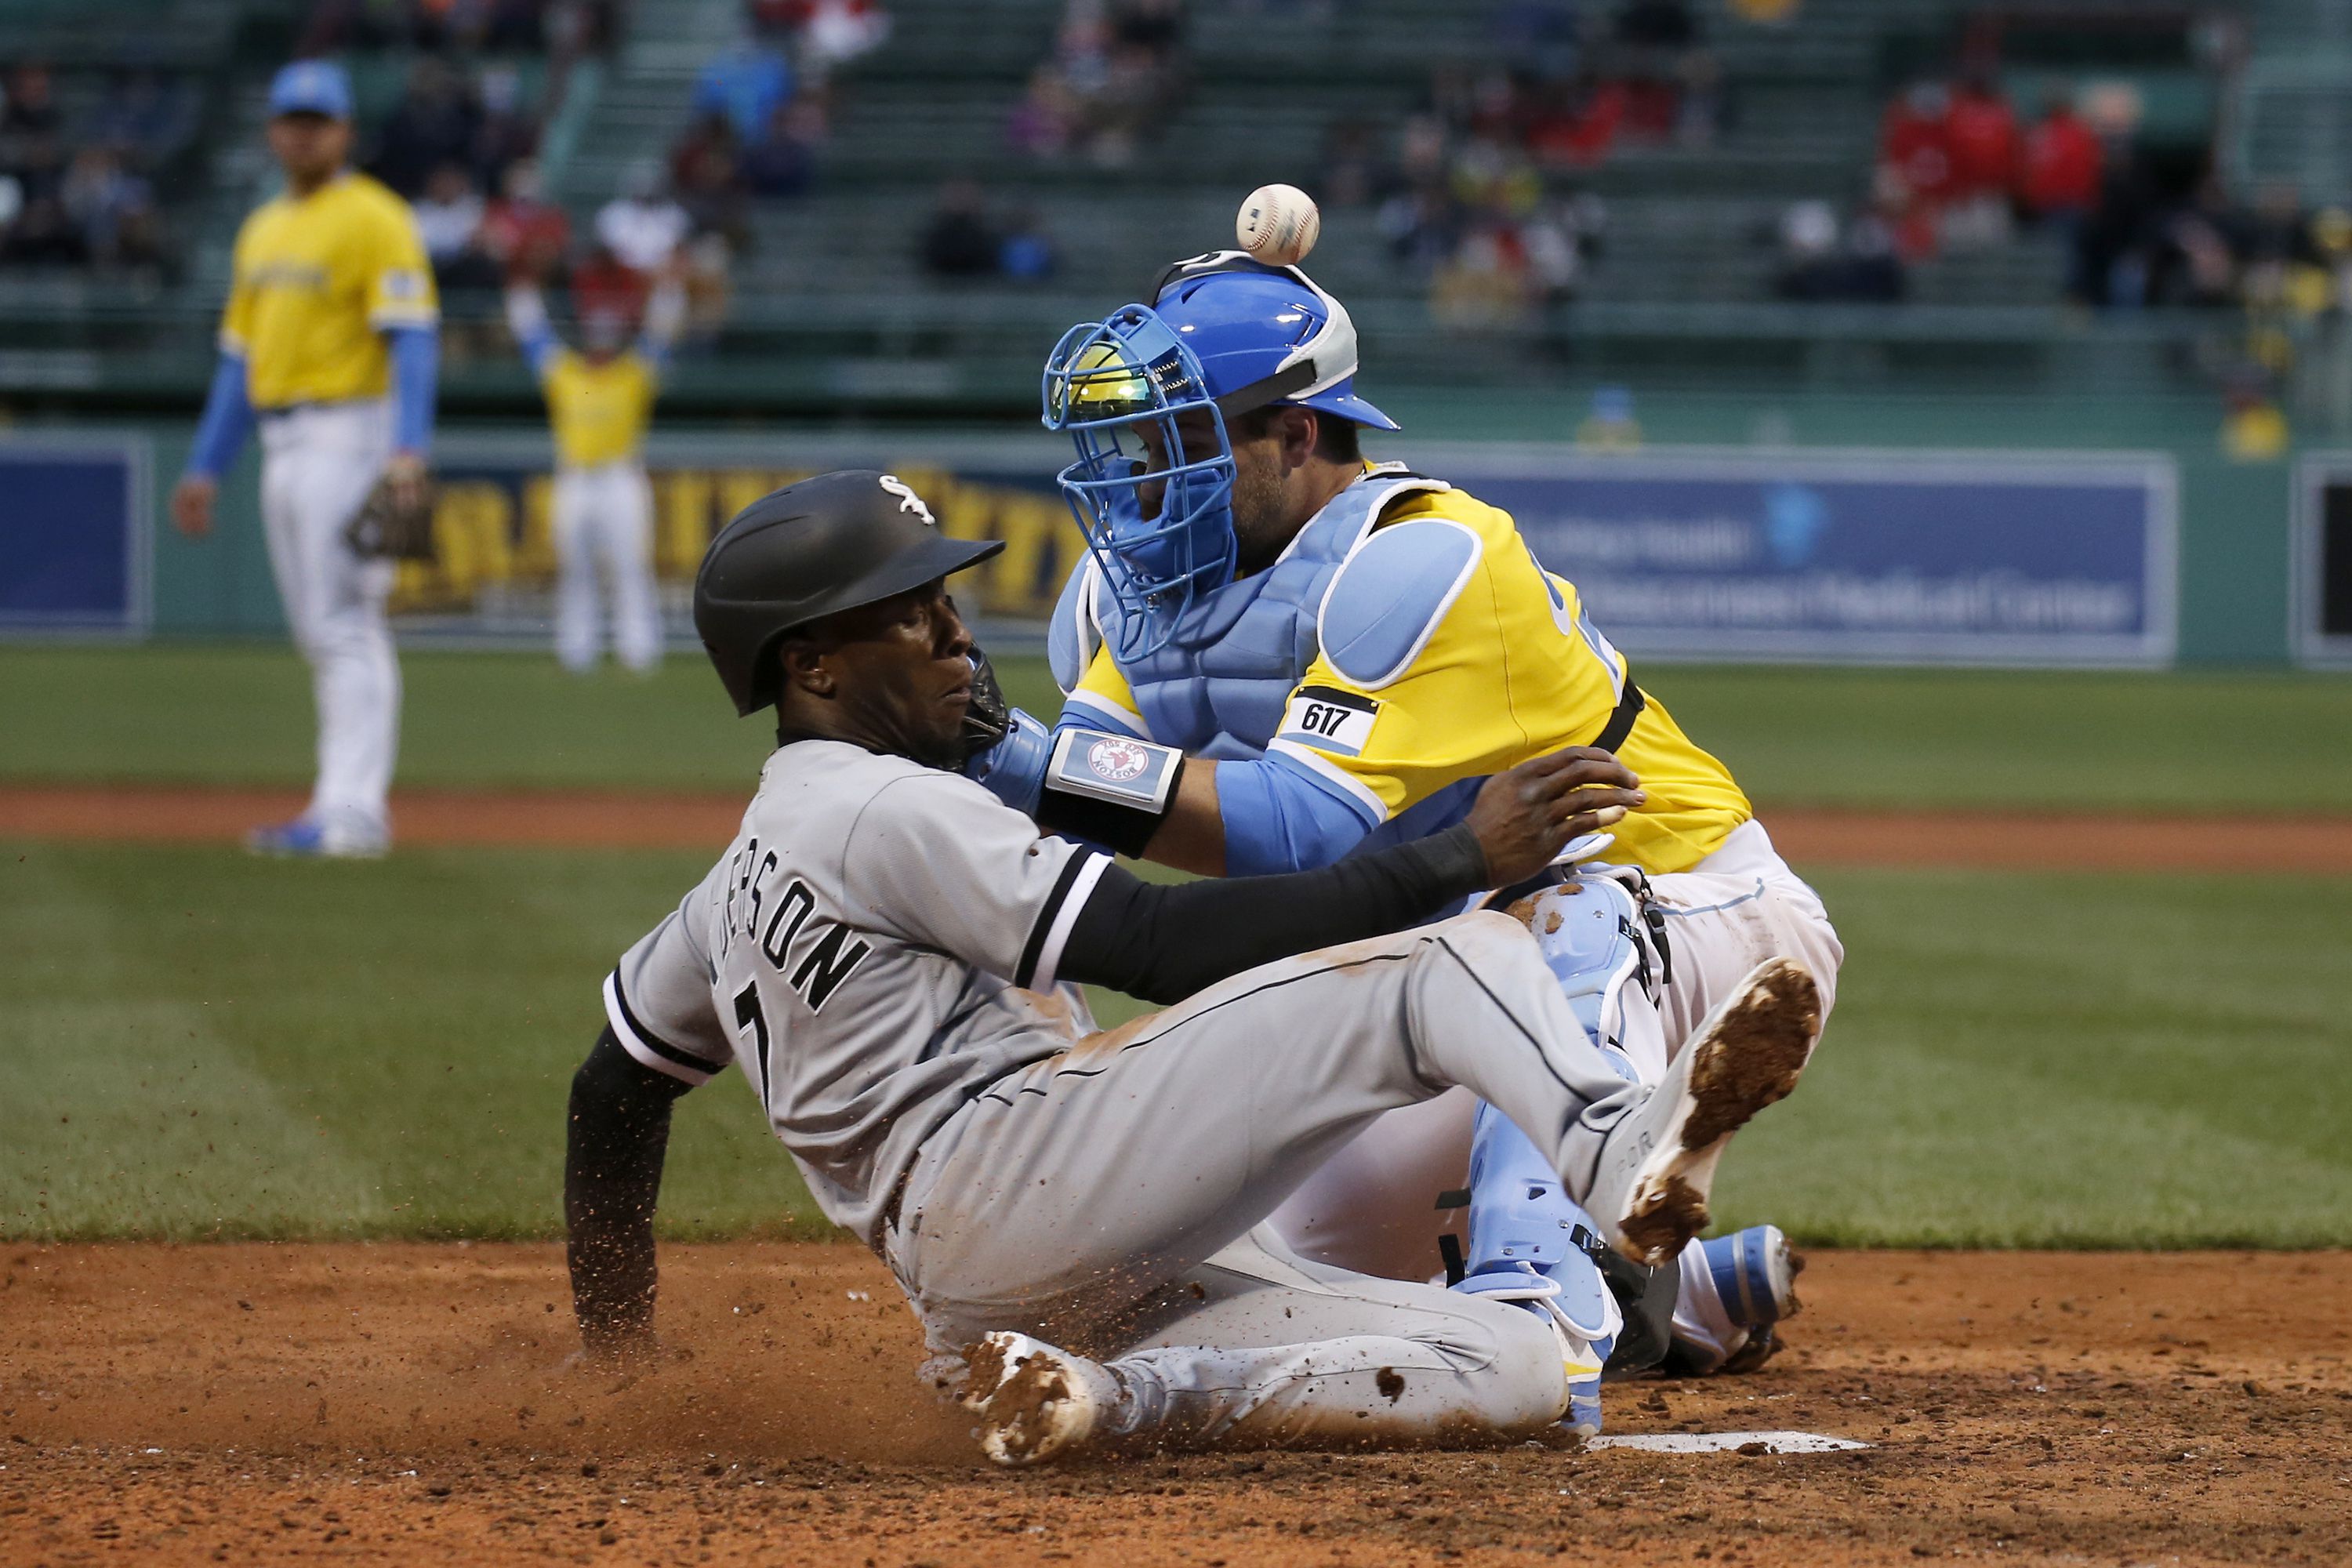 New-look Red Sox top White Sox 7-4, Gonzalez HR starts rally - The